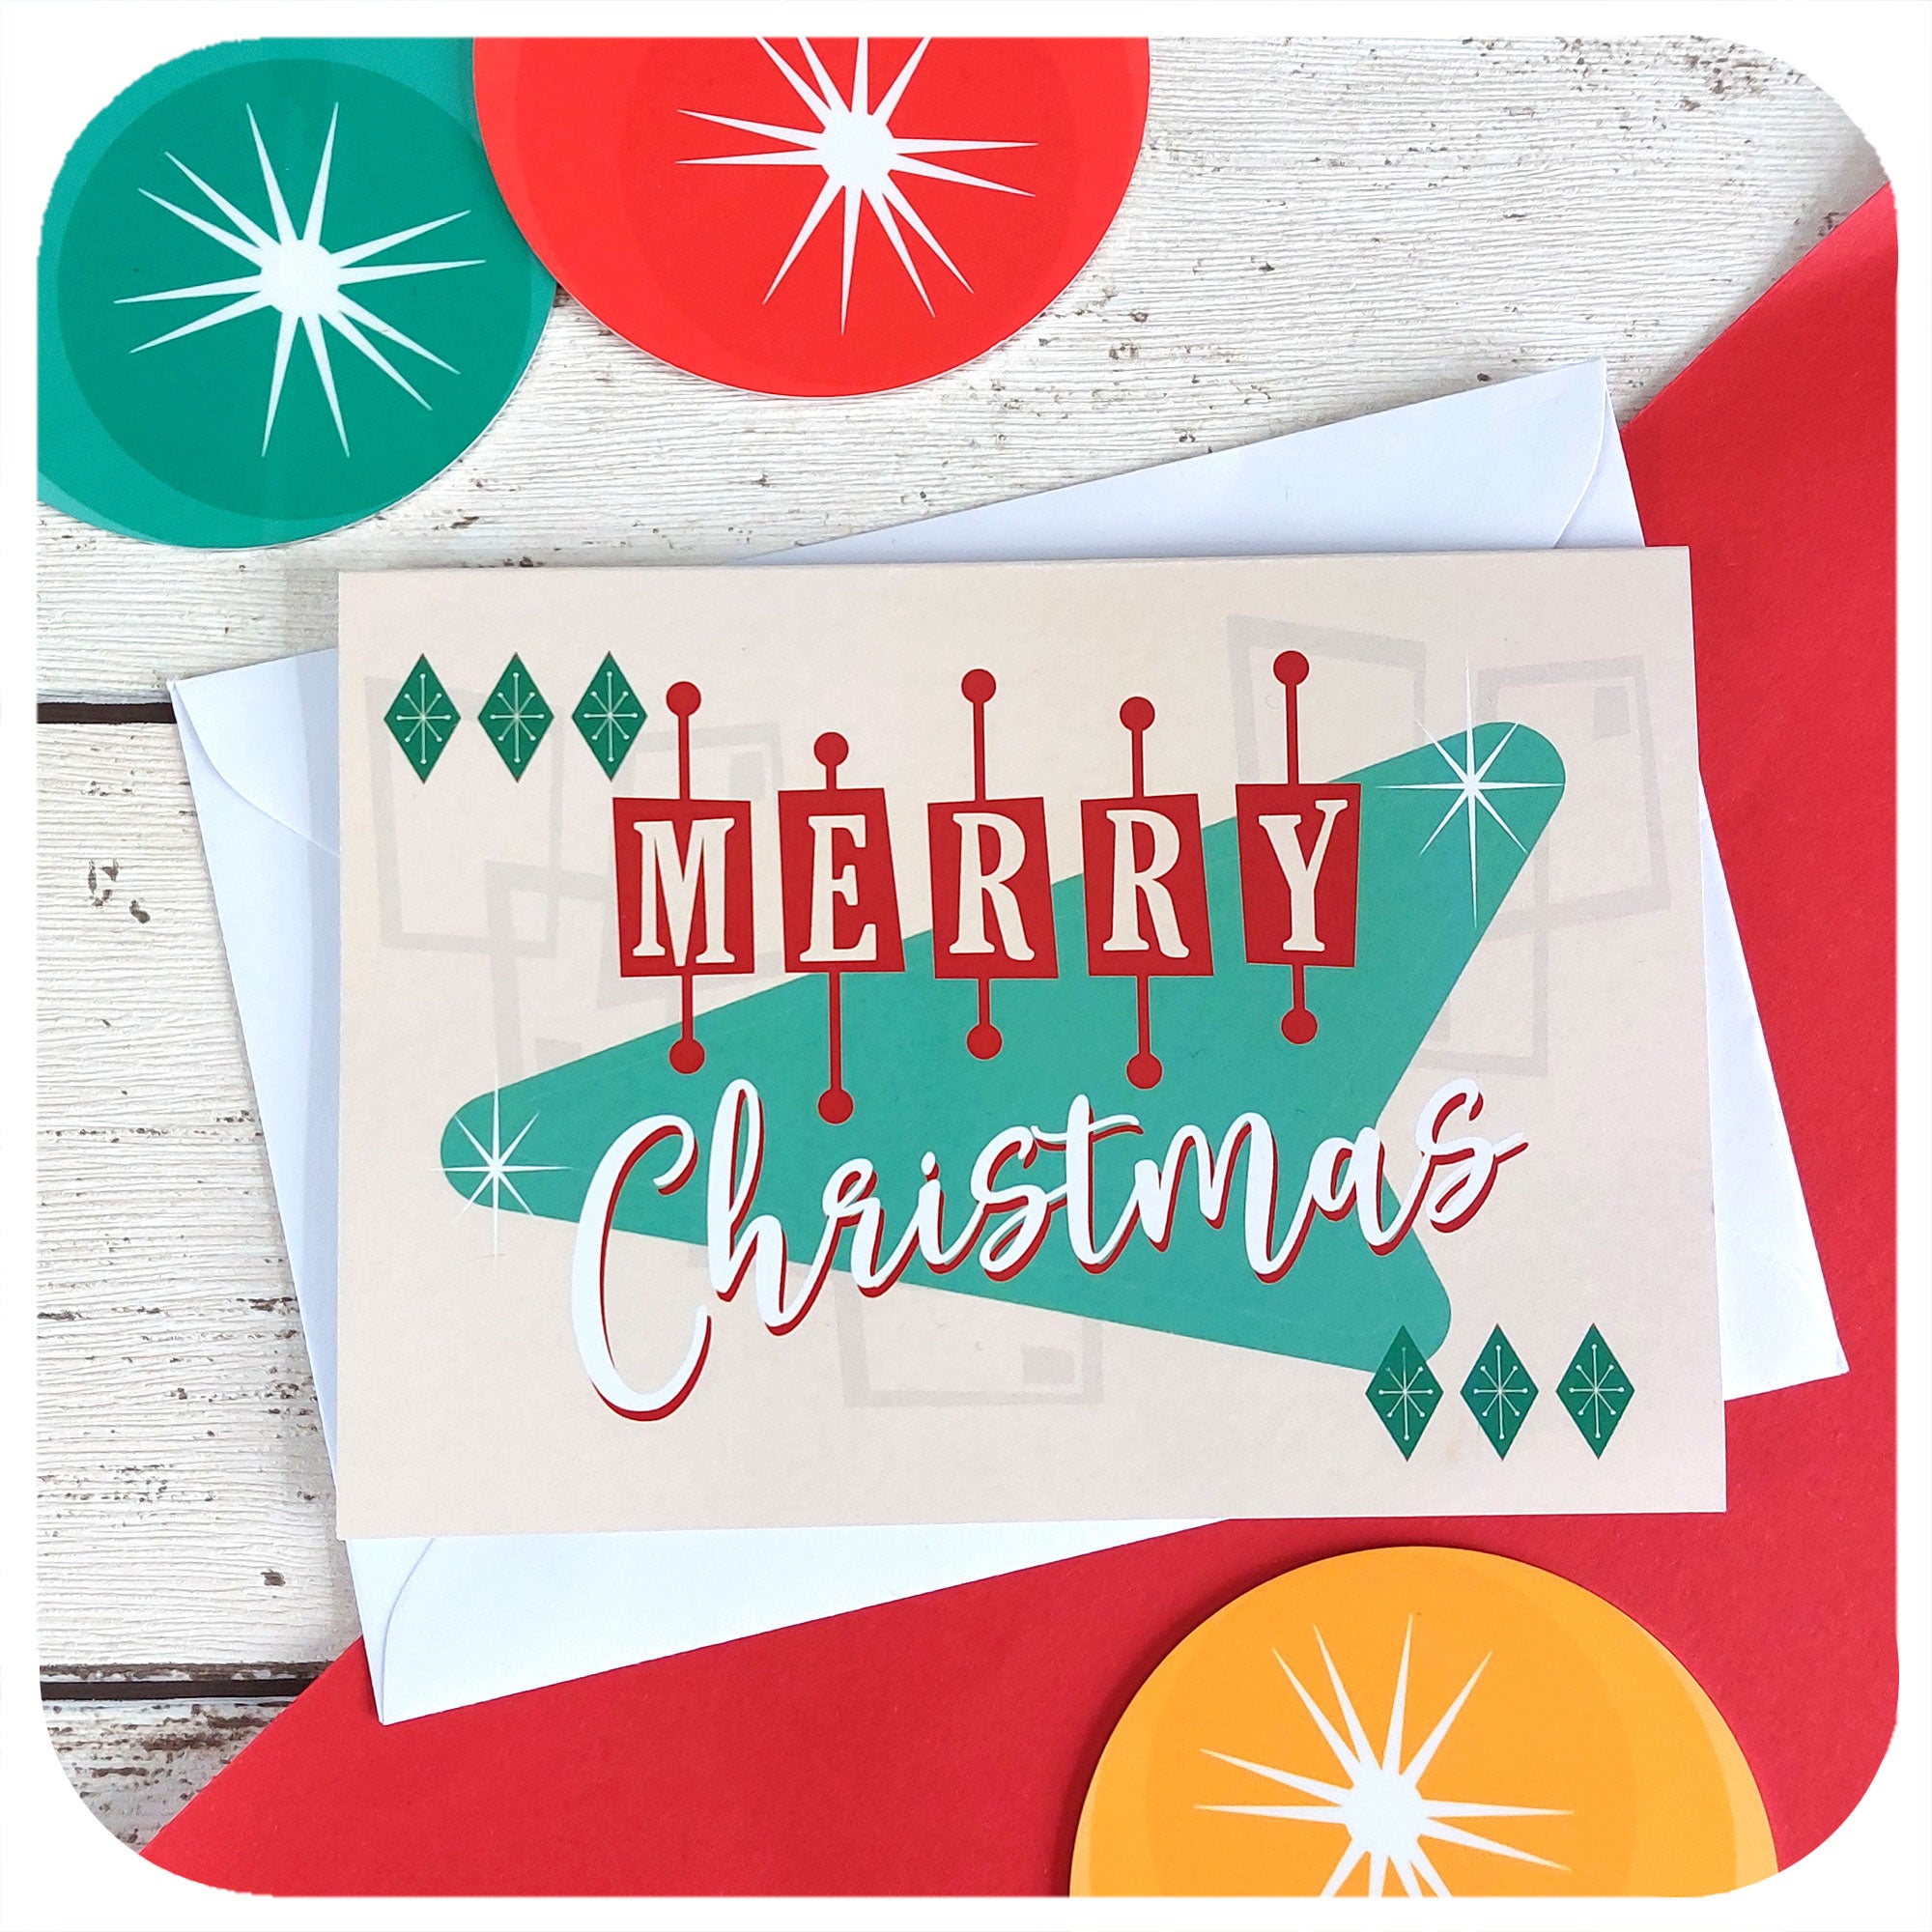 Atomic Style Christmas Card with envelope, on a red & white background with retro xmas decorations. Text on the card reads "Merry Christmas" | The Inkabilly Emporium